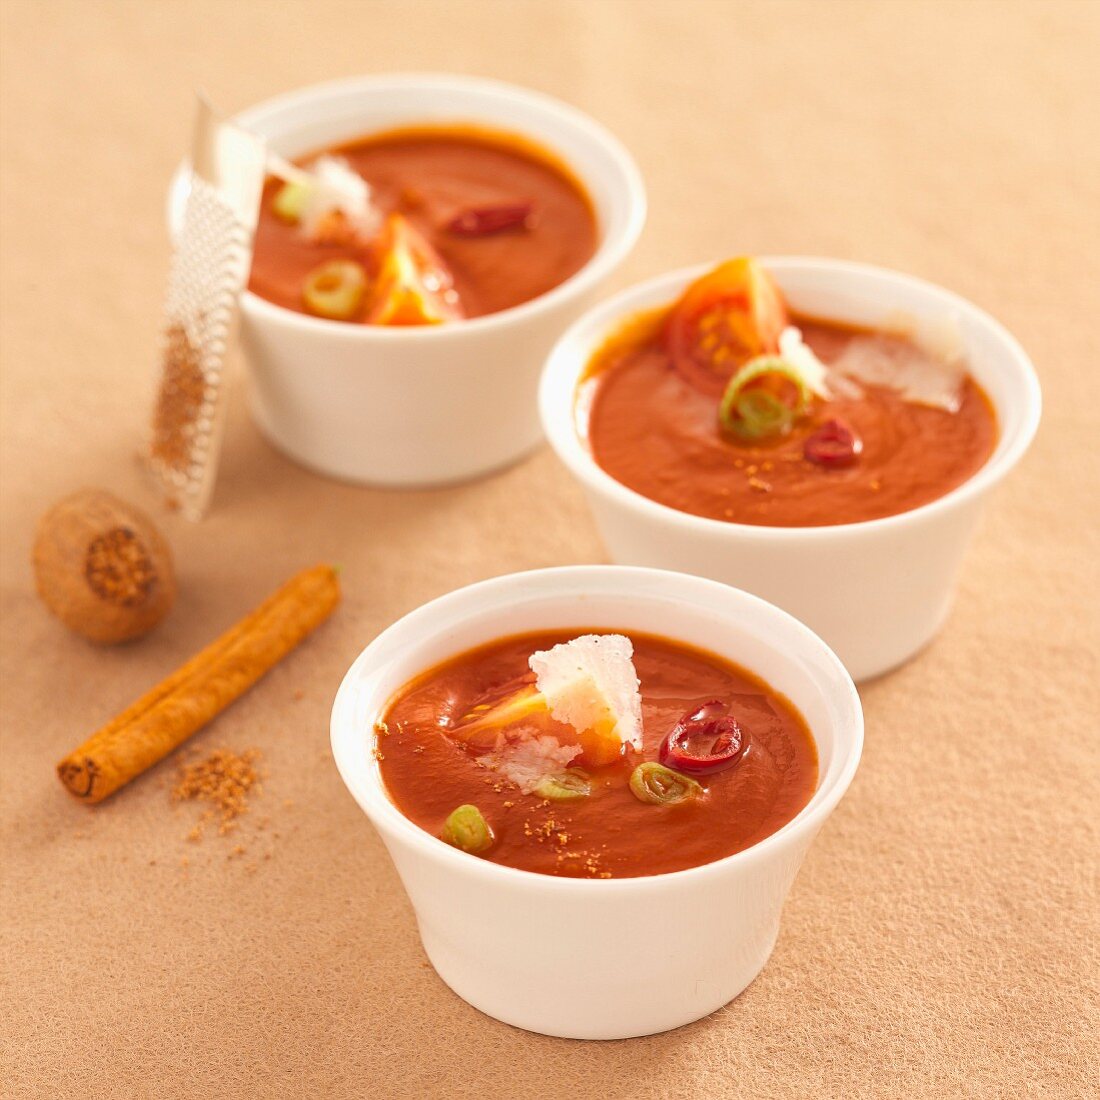 Tomato soup with spices and Parmesan shavings